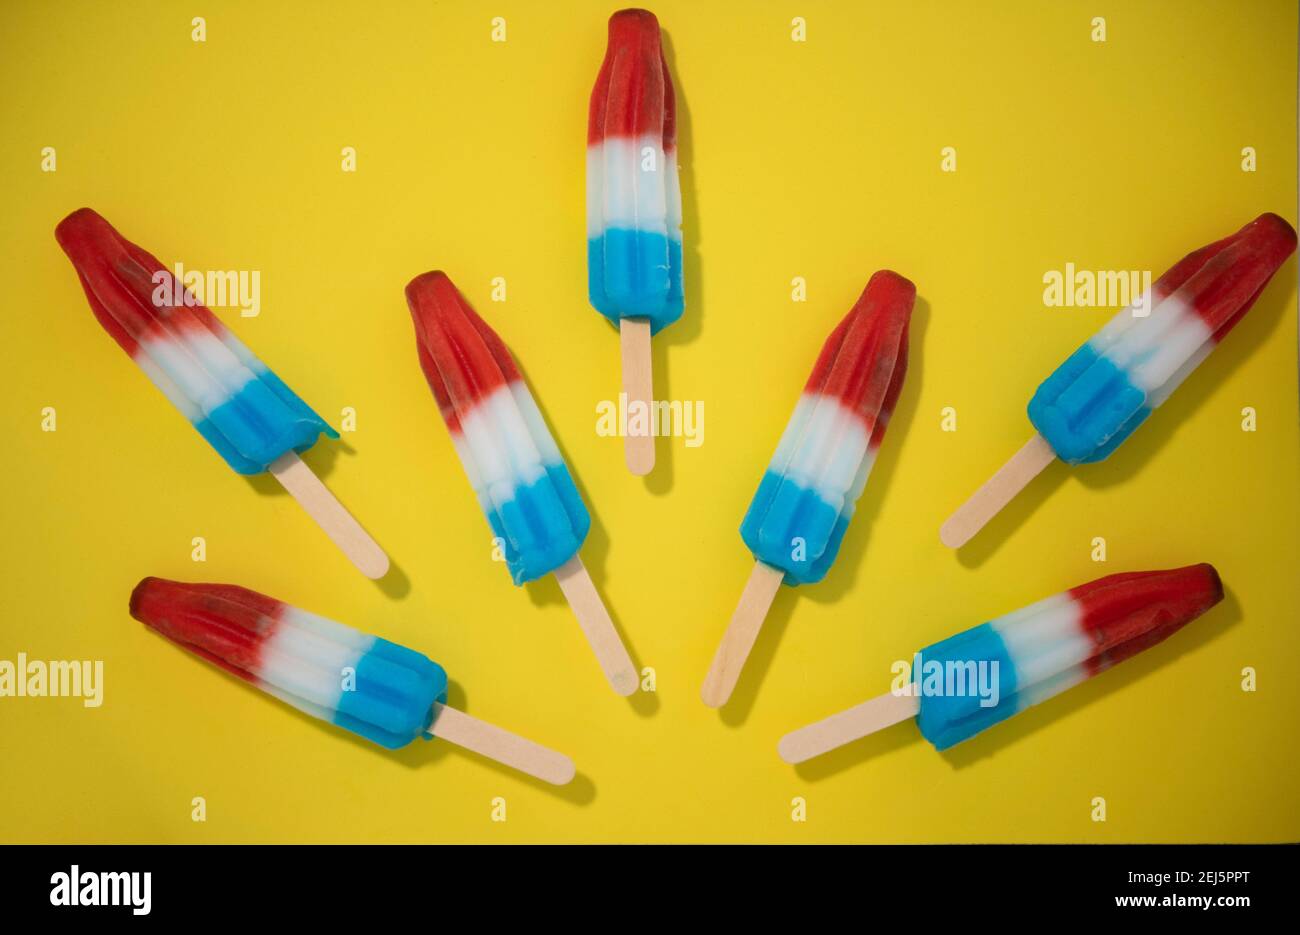 Red, White and Blue Novelty ice cream bombpop shot on yellow background, stop action animation exploding like fireworks. Series 7 of 8. Stock Photo